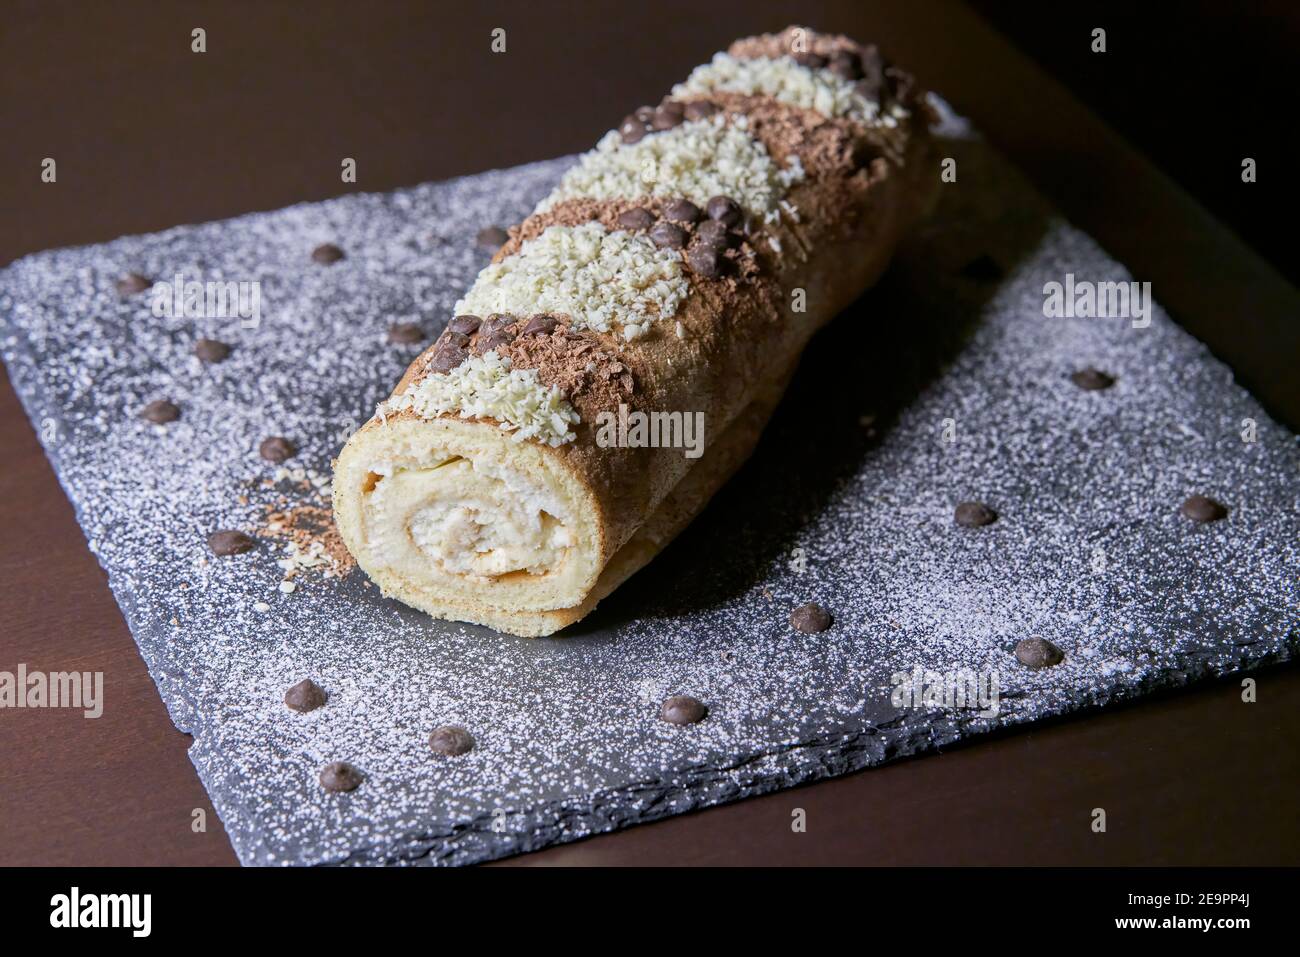 Perspective view of a handmade gypsy arm of chocolate and cream with dark and white chocolate shavings on slate plate Stock Photo